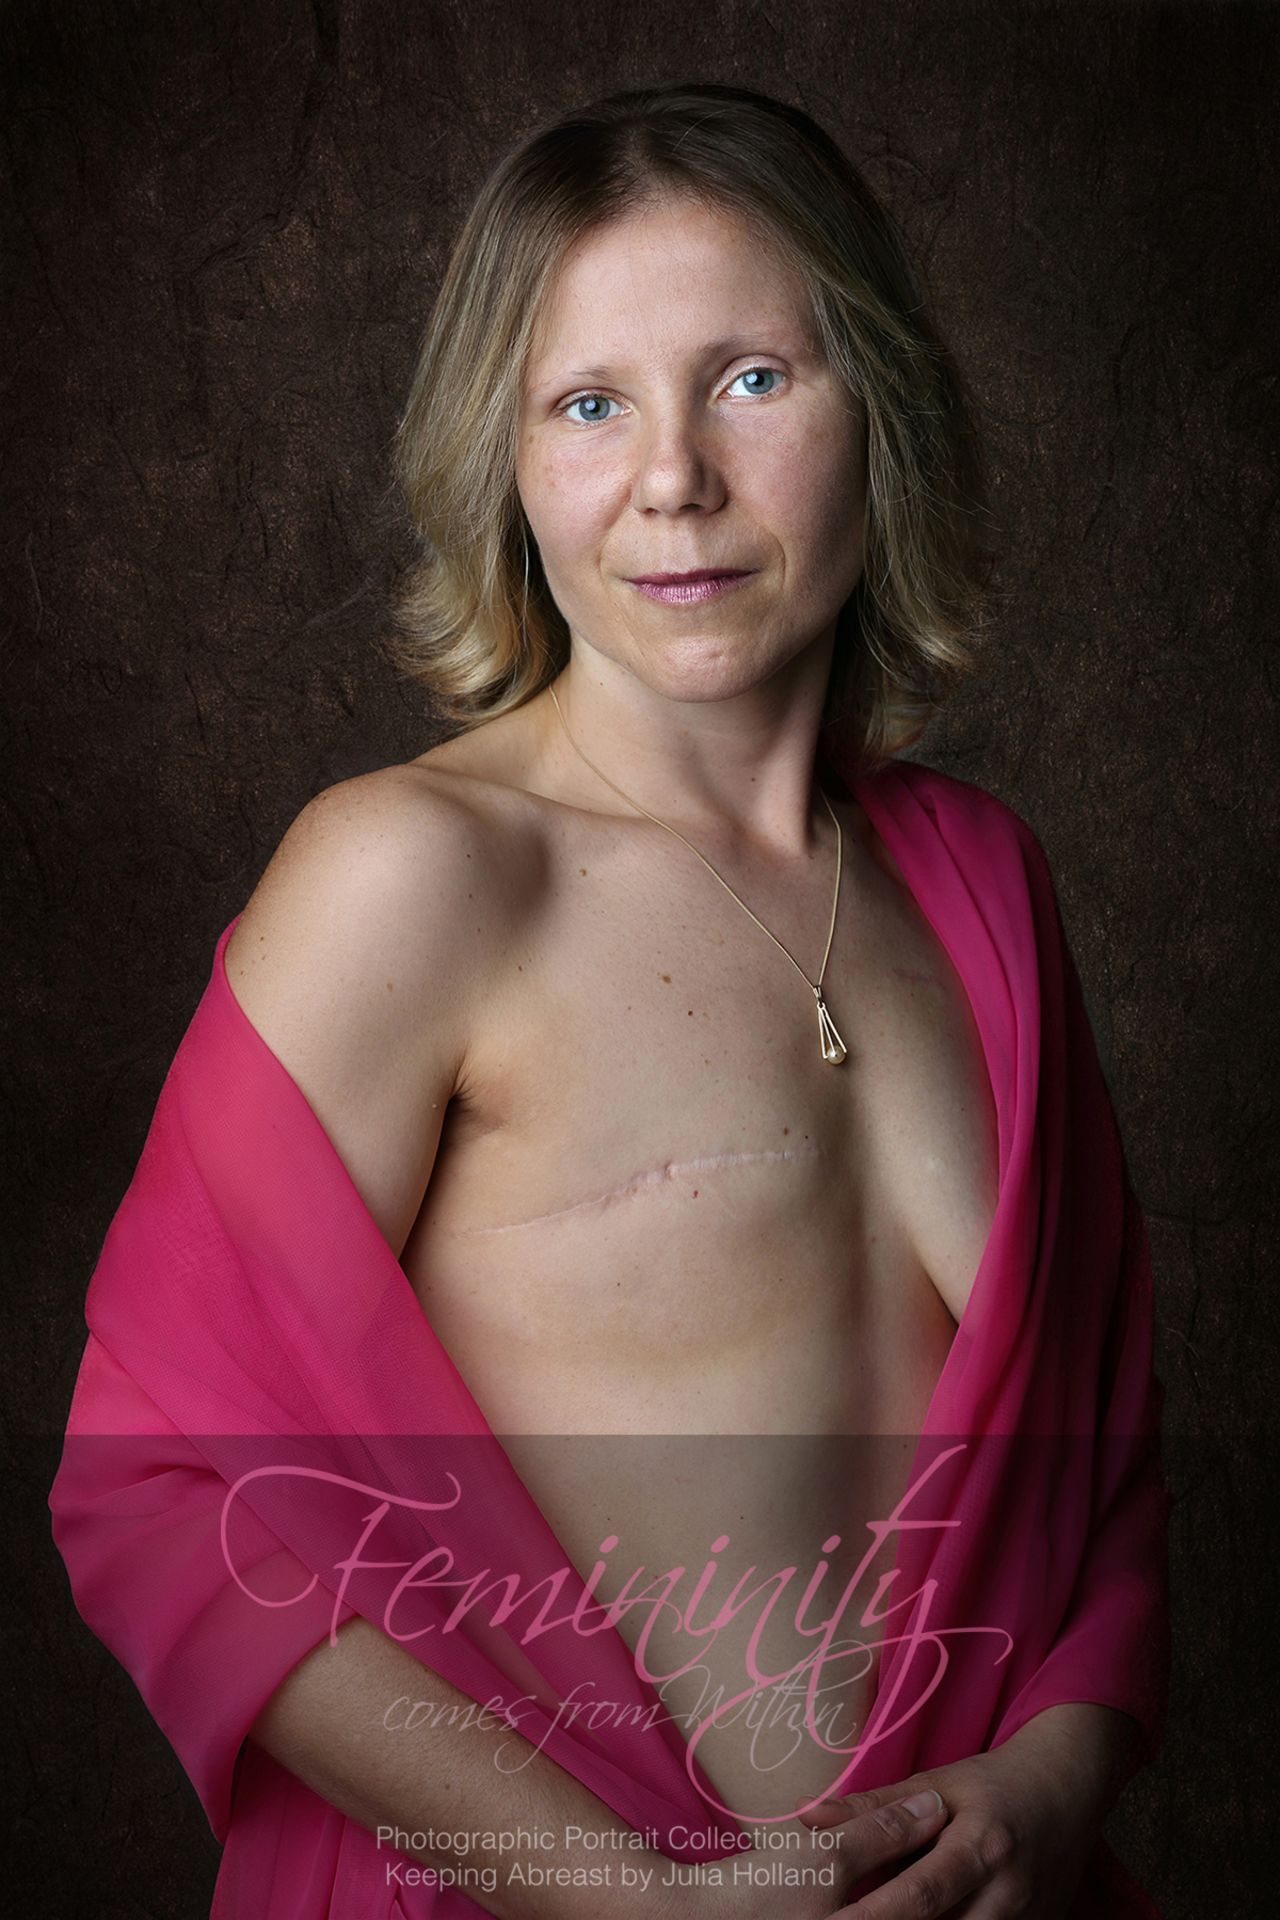 Rebecca lost her right breast to cancer. She chose not to have breast reconstruction at this time.